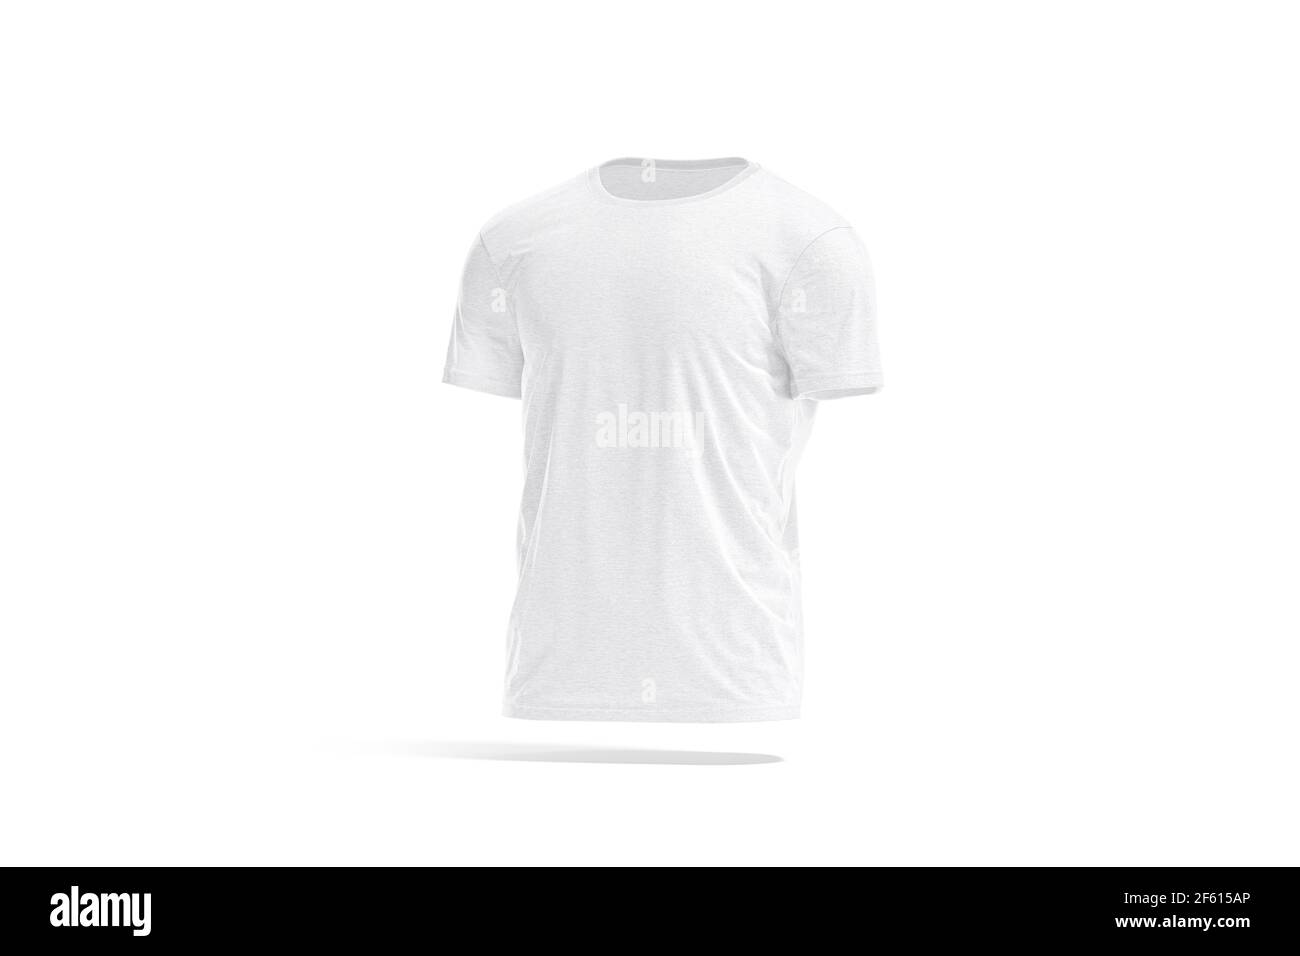 Blank white wrinkled t-shirt mockup, side view Stock Photo - Alamy